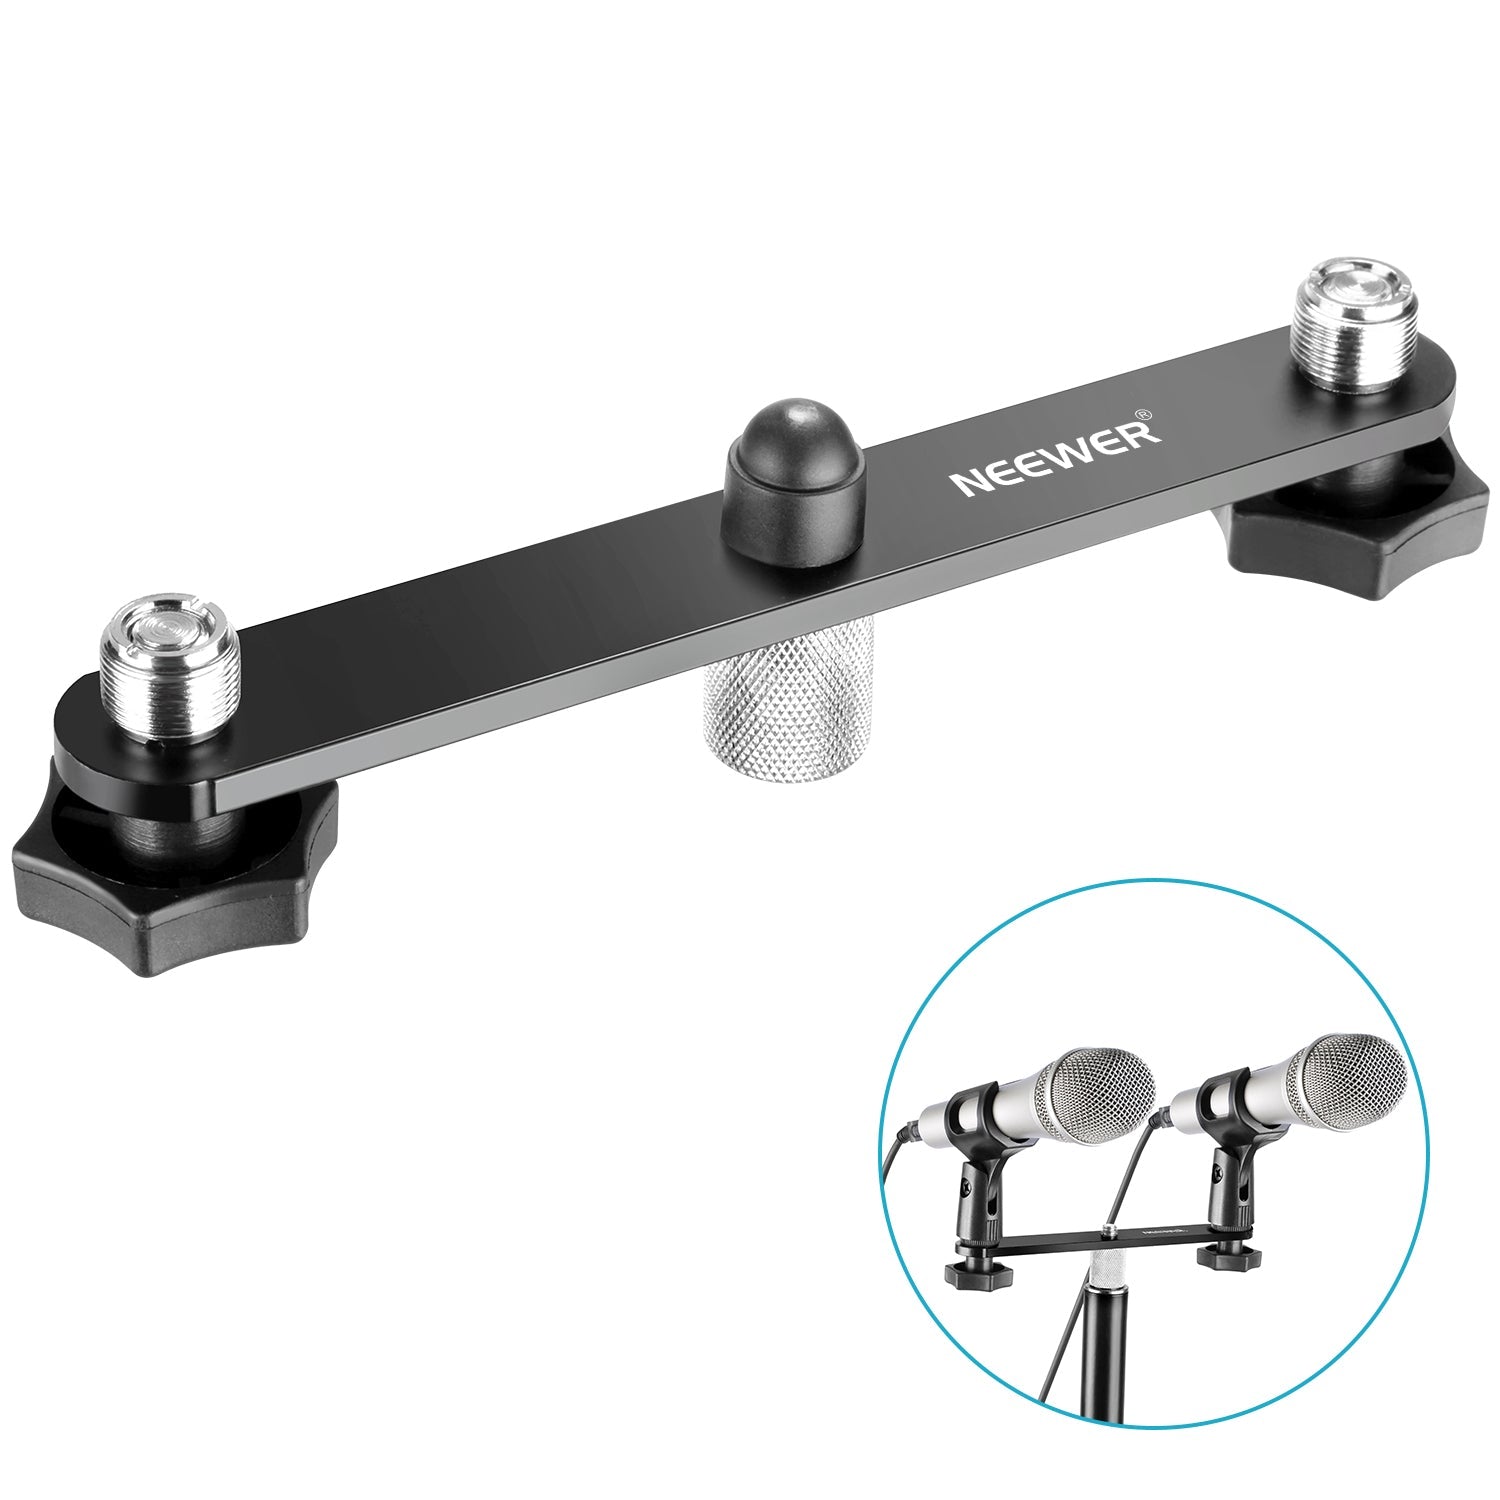 Neewer NW-036 Durable Sturdy Steel Microphone Mount Bracket T-bar with Standard 5/8-inch Thread Smooth Finish